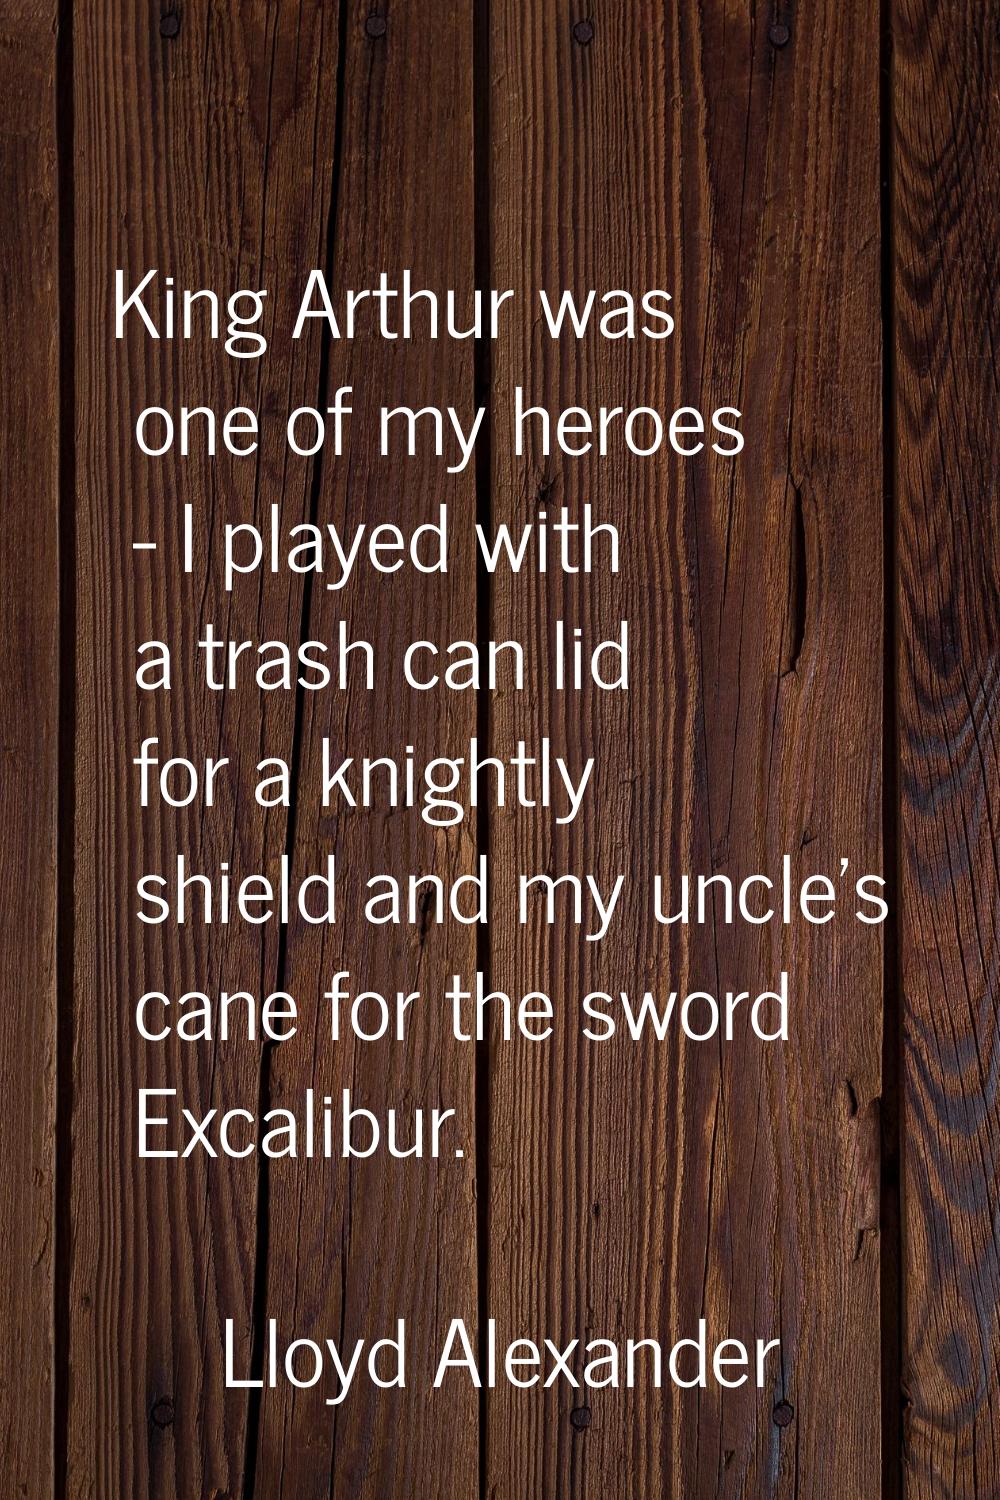 King Arthur was one of my heroes - I played with a trash can lid for a knightly shield and my uncle